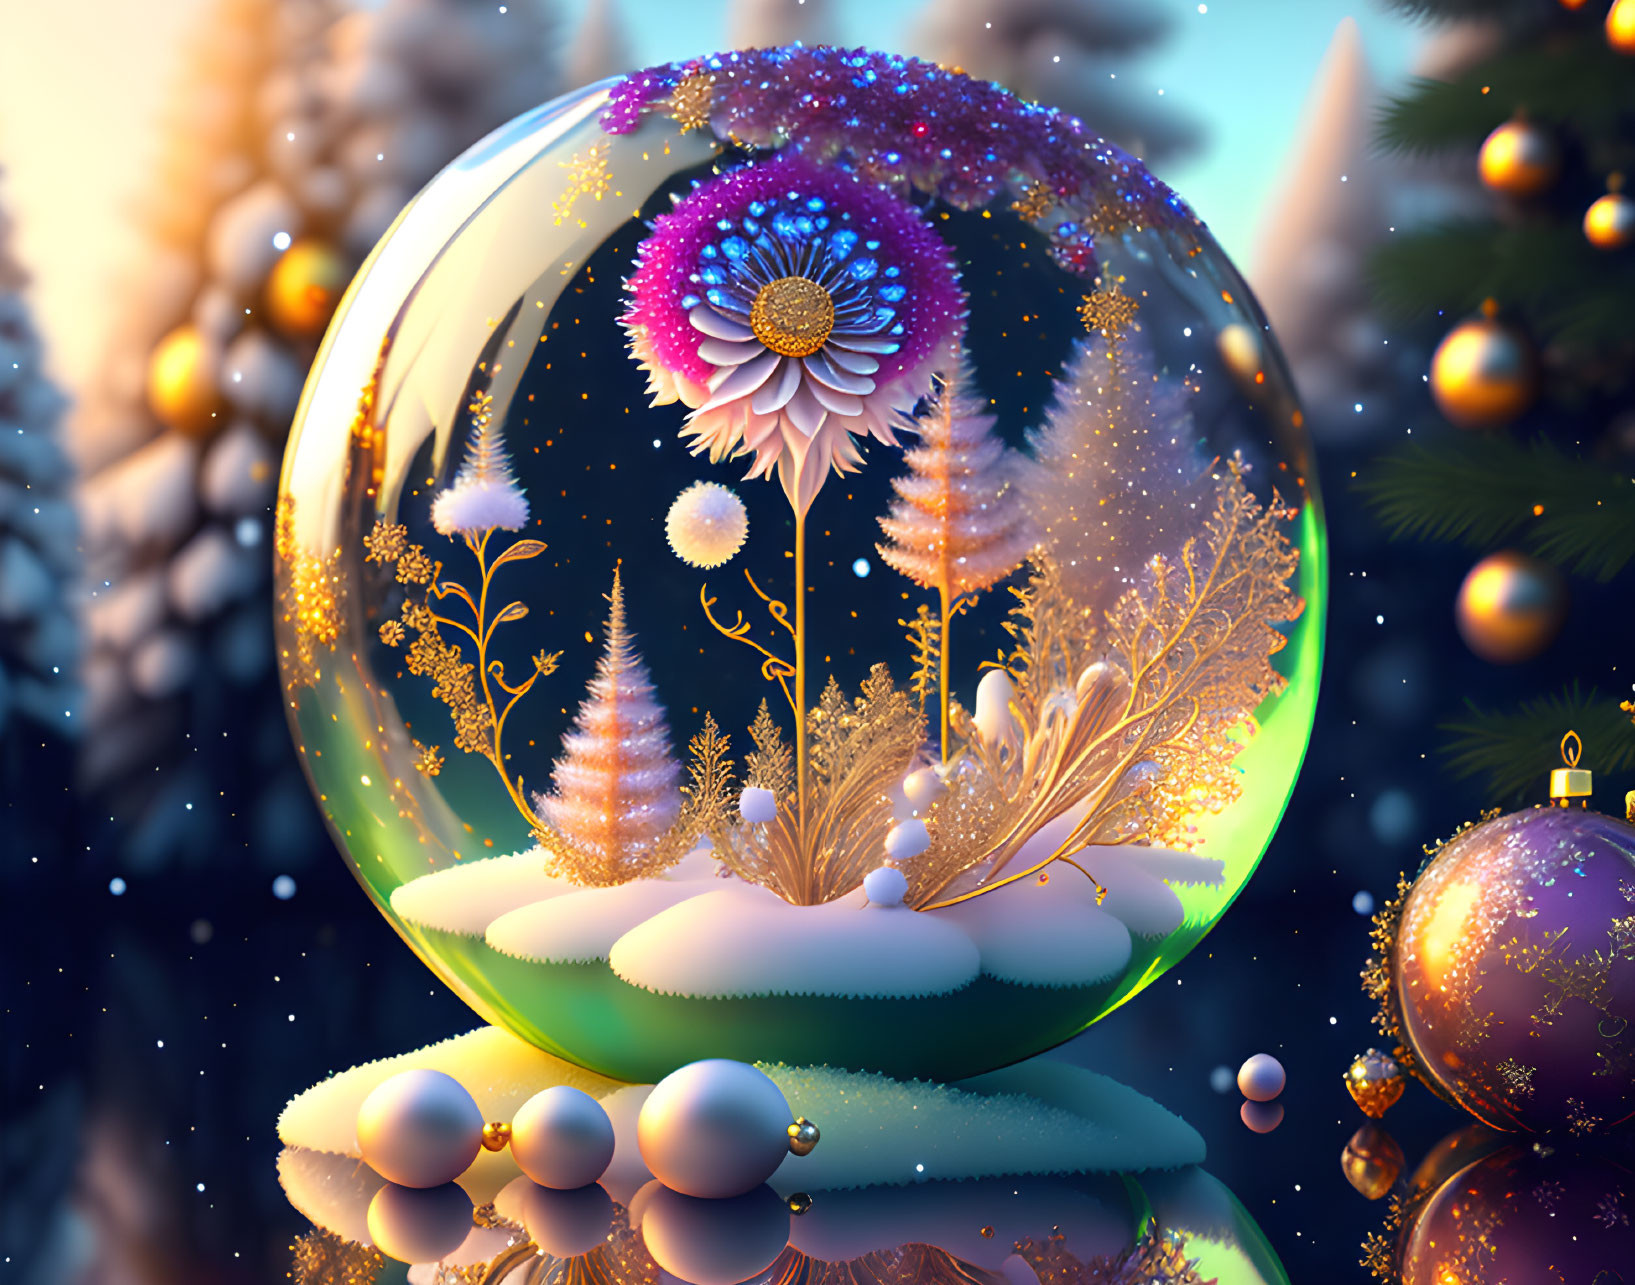 Colorful digital artwork: Translucent sphere with flowers and foliage in wintry forest.